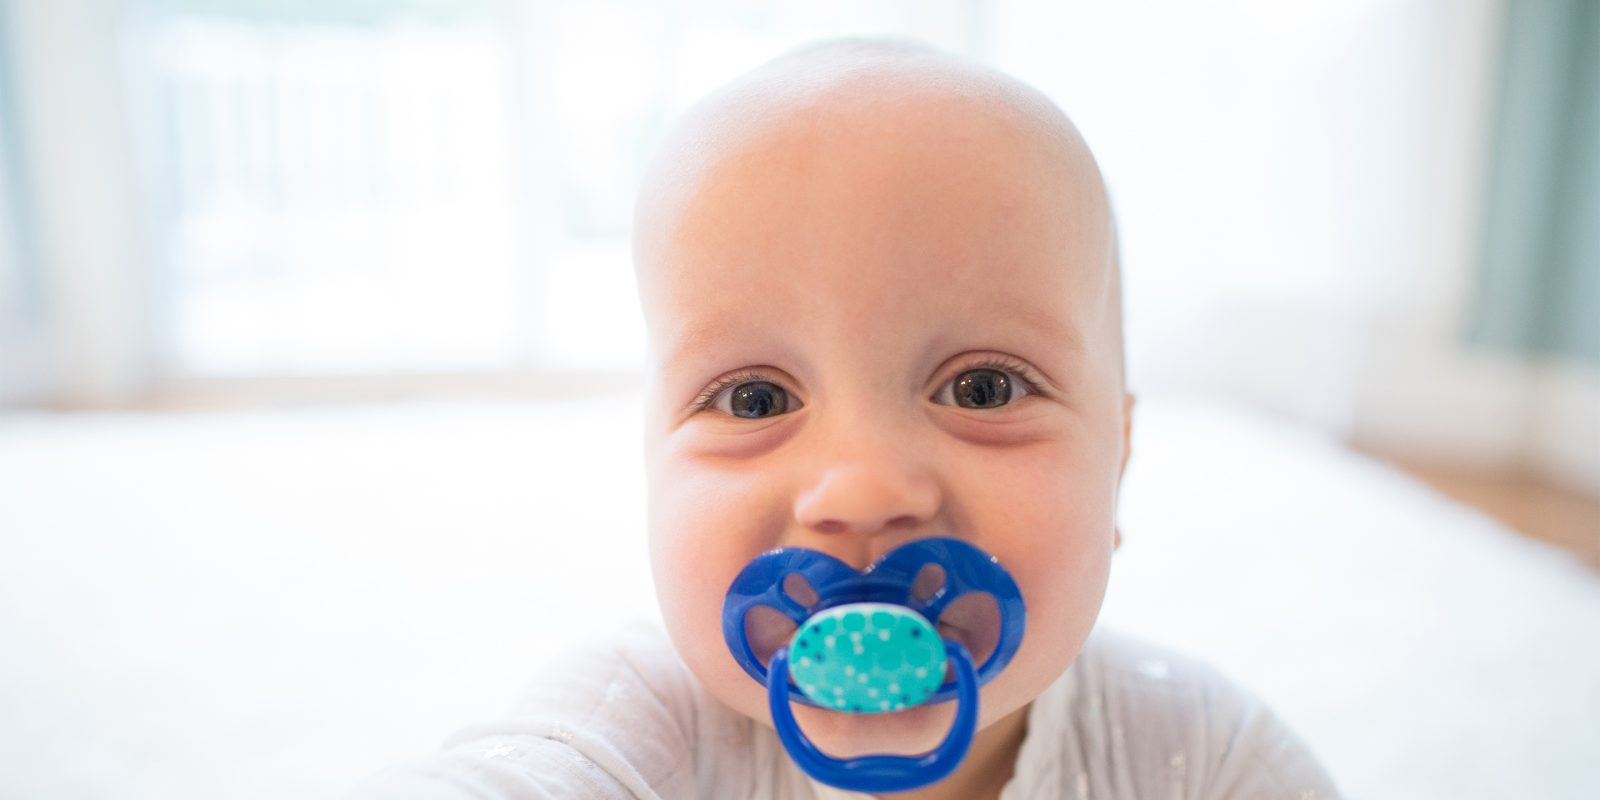 Up close image of smiling baby with pacifier in mouth